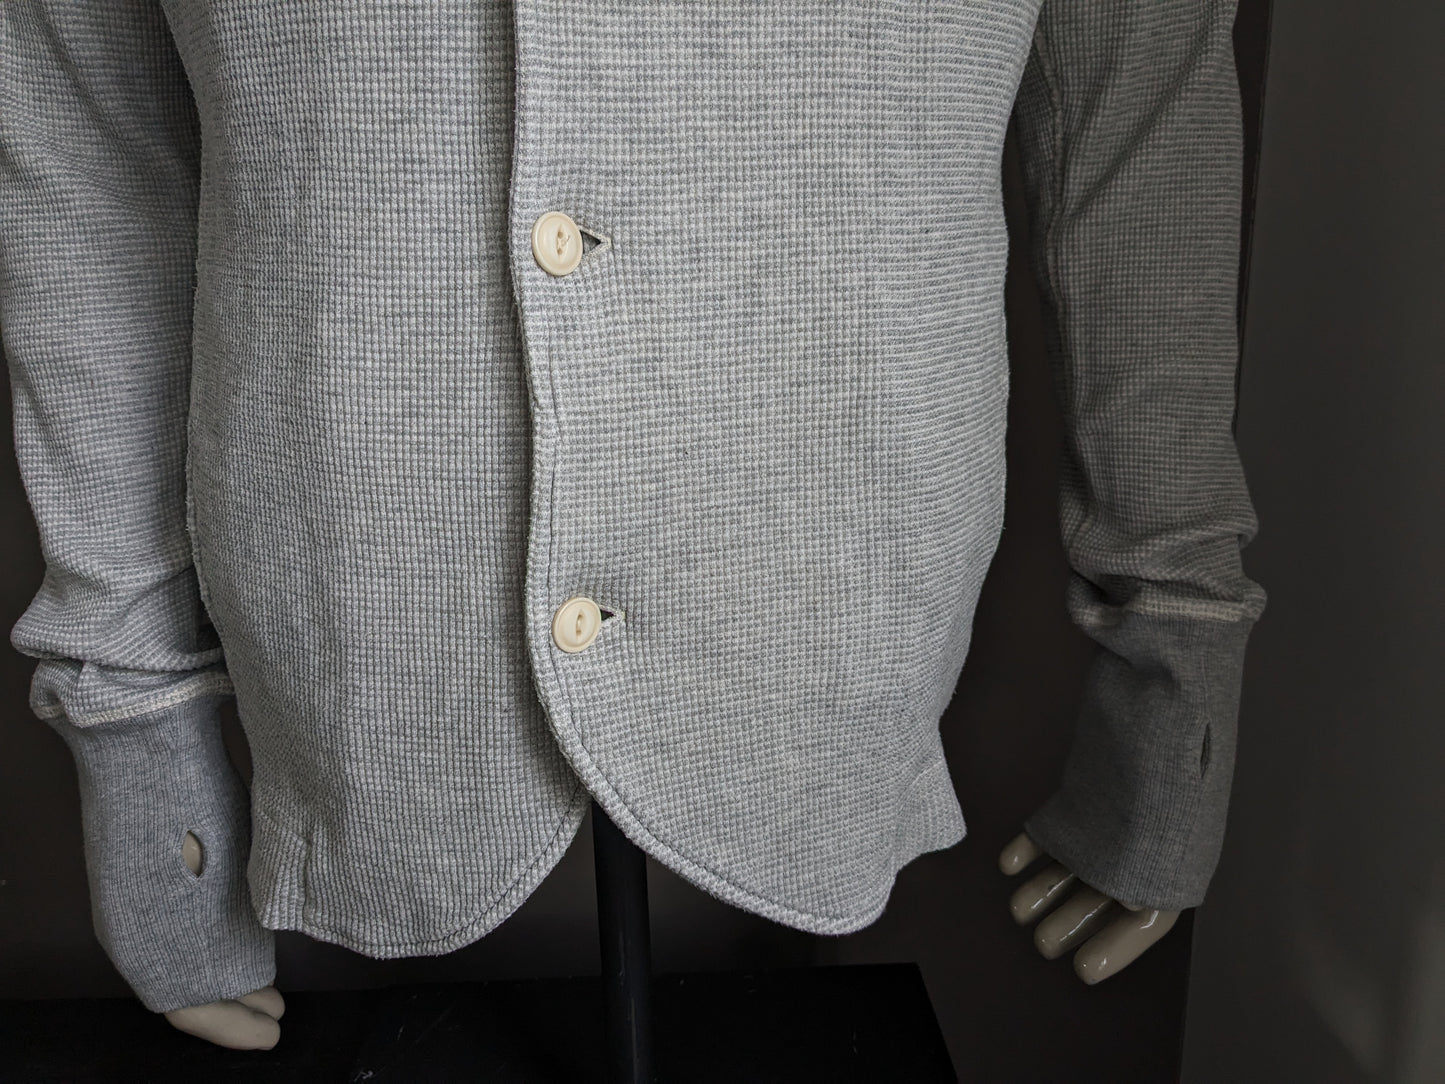 Diesel cardigan with collar and buttons. Gray mixed with thumb holes in sleeve. Size L.